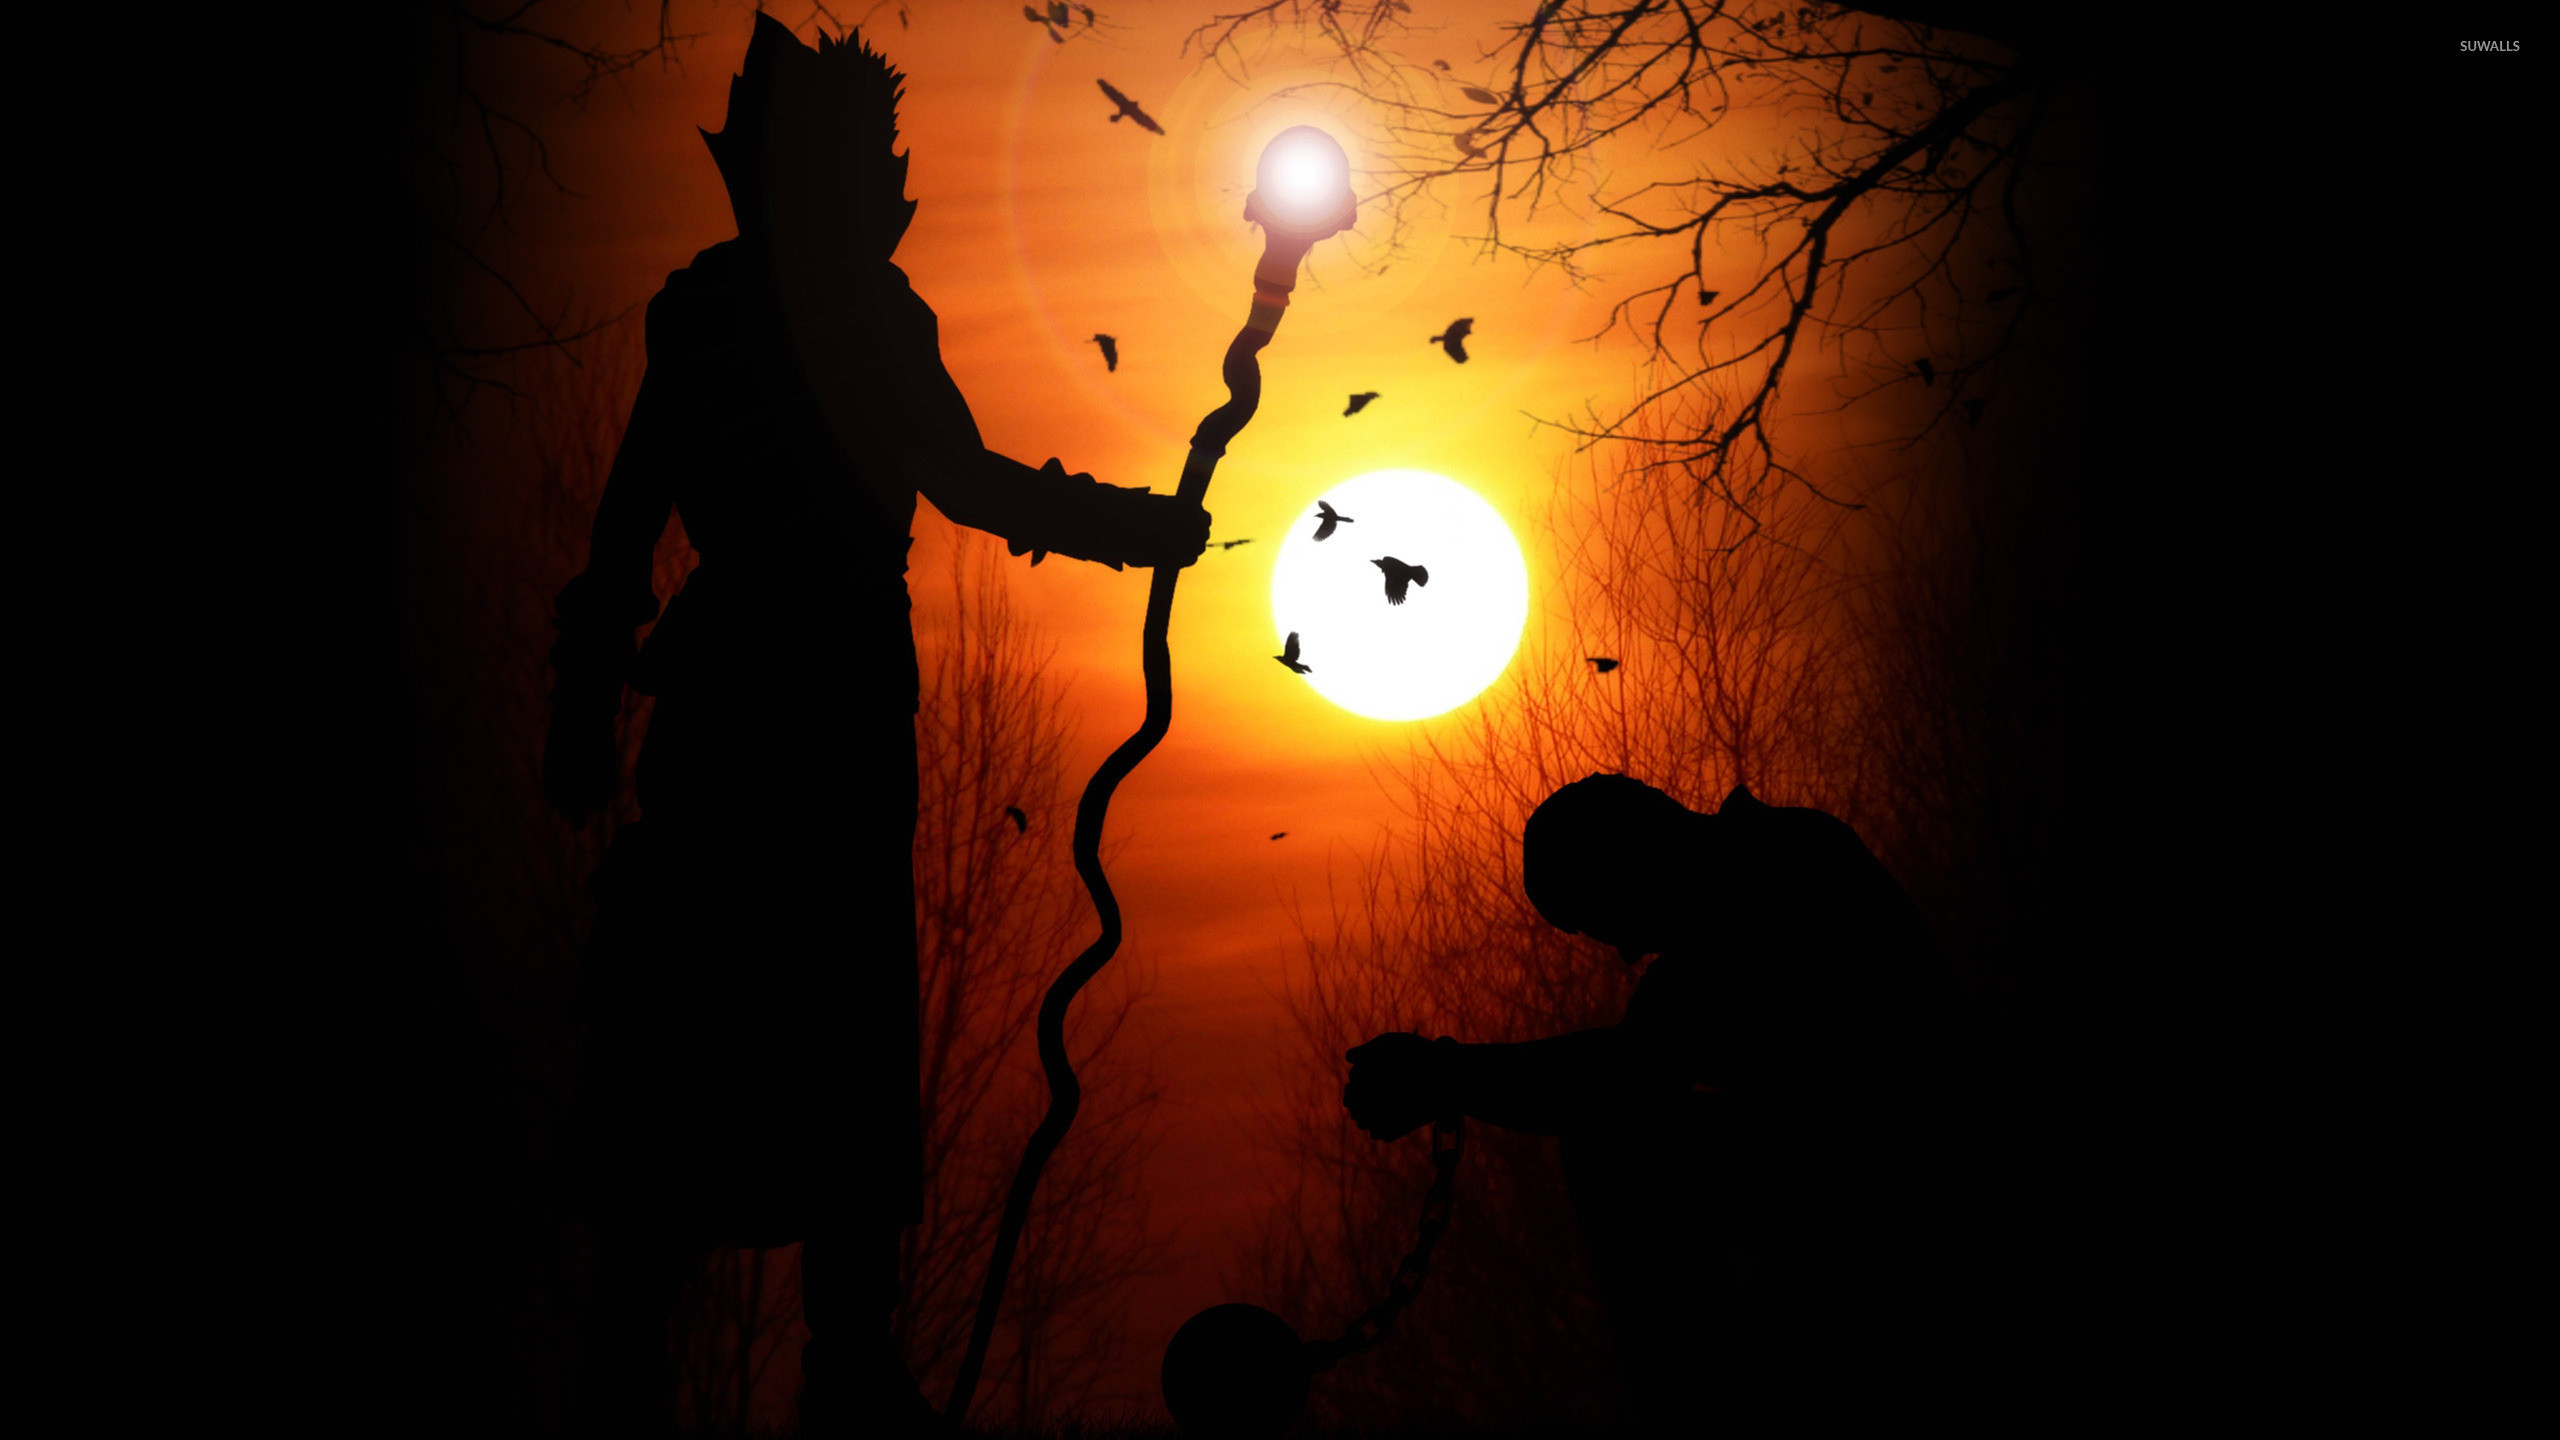 2560x1440 Wizard silhouette in the sunset wallpaper  jpg